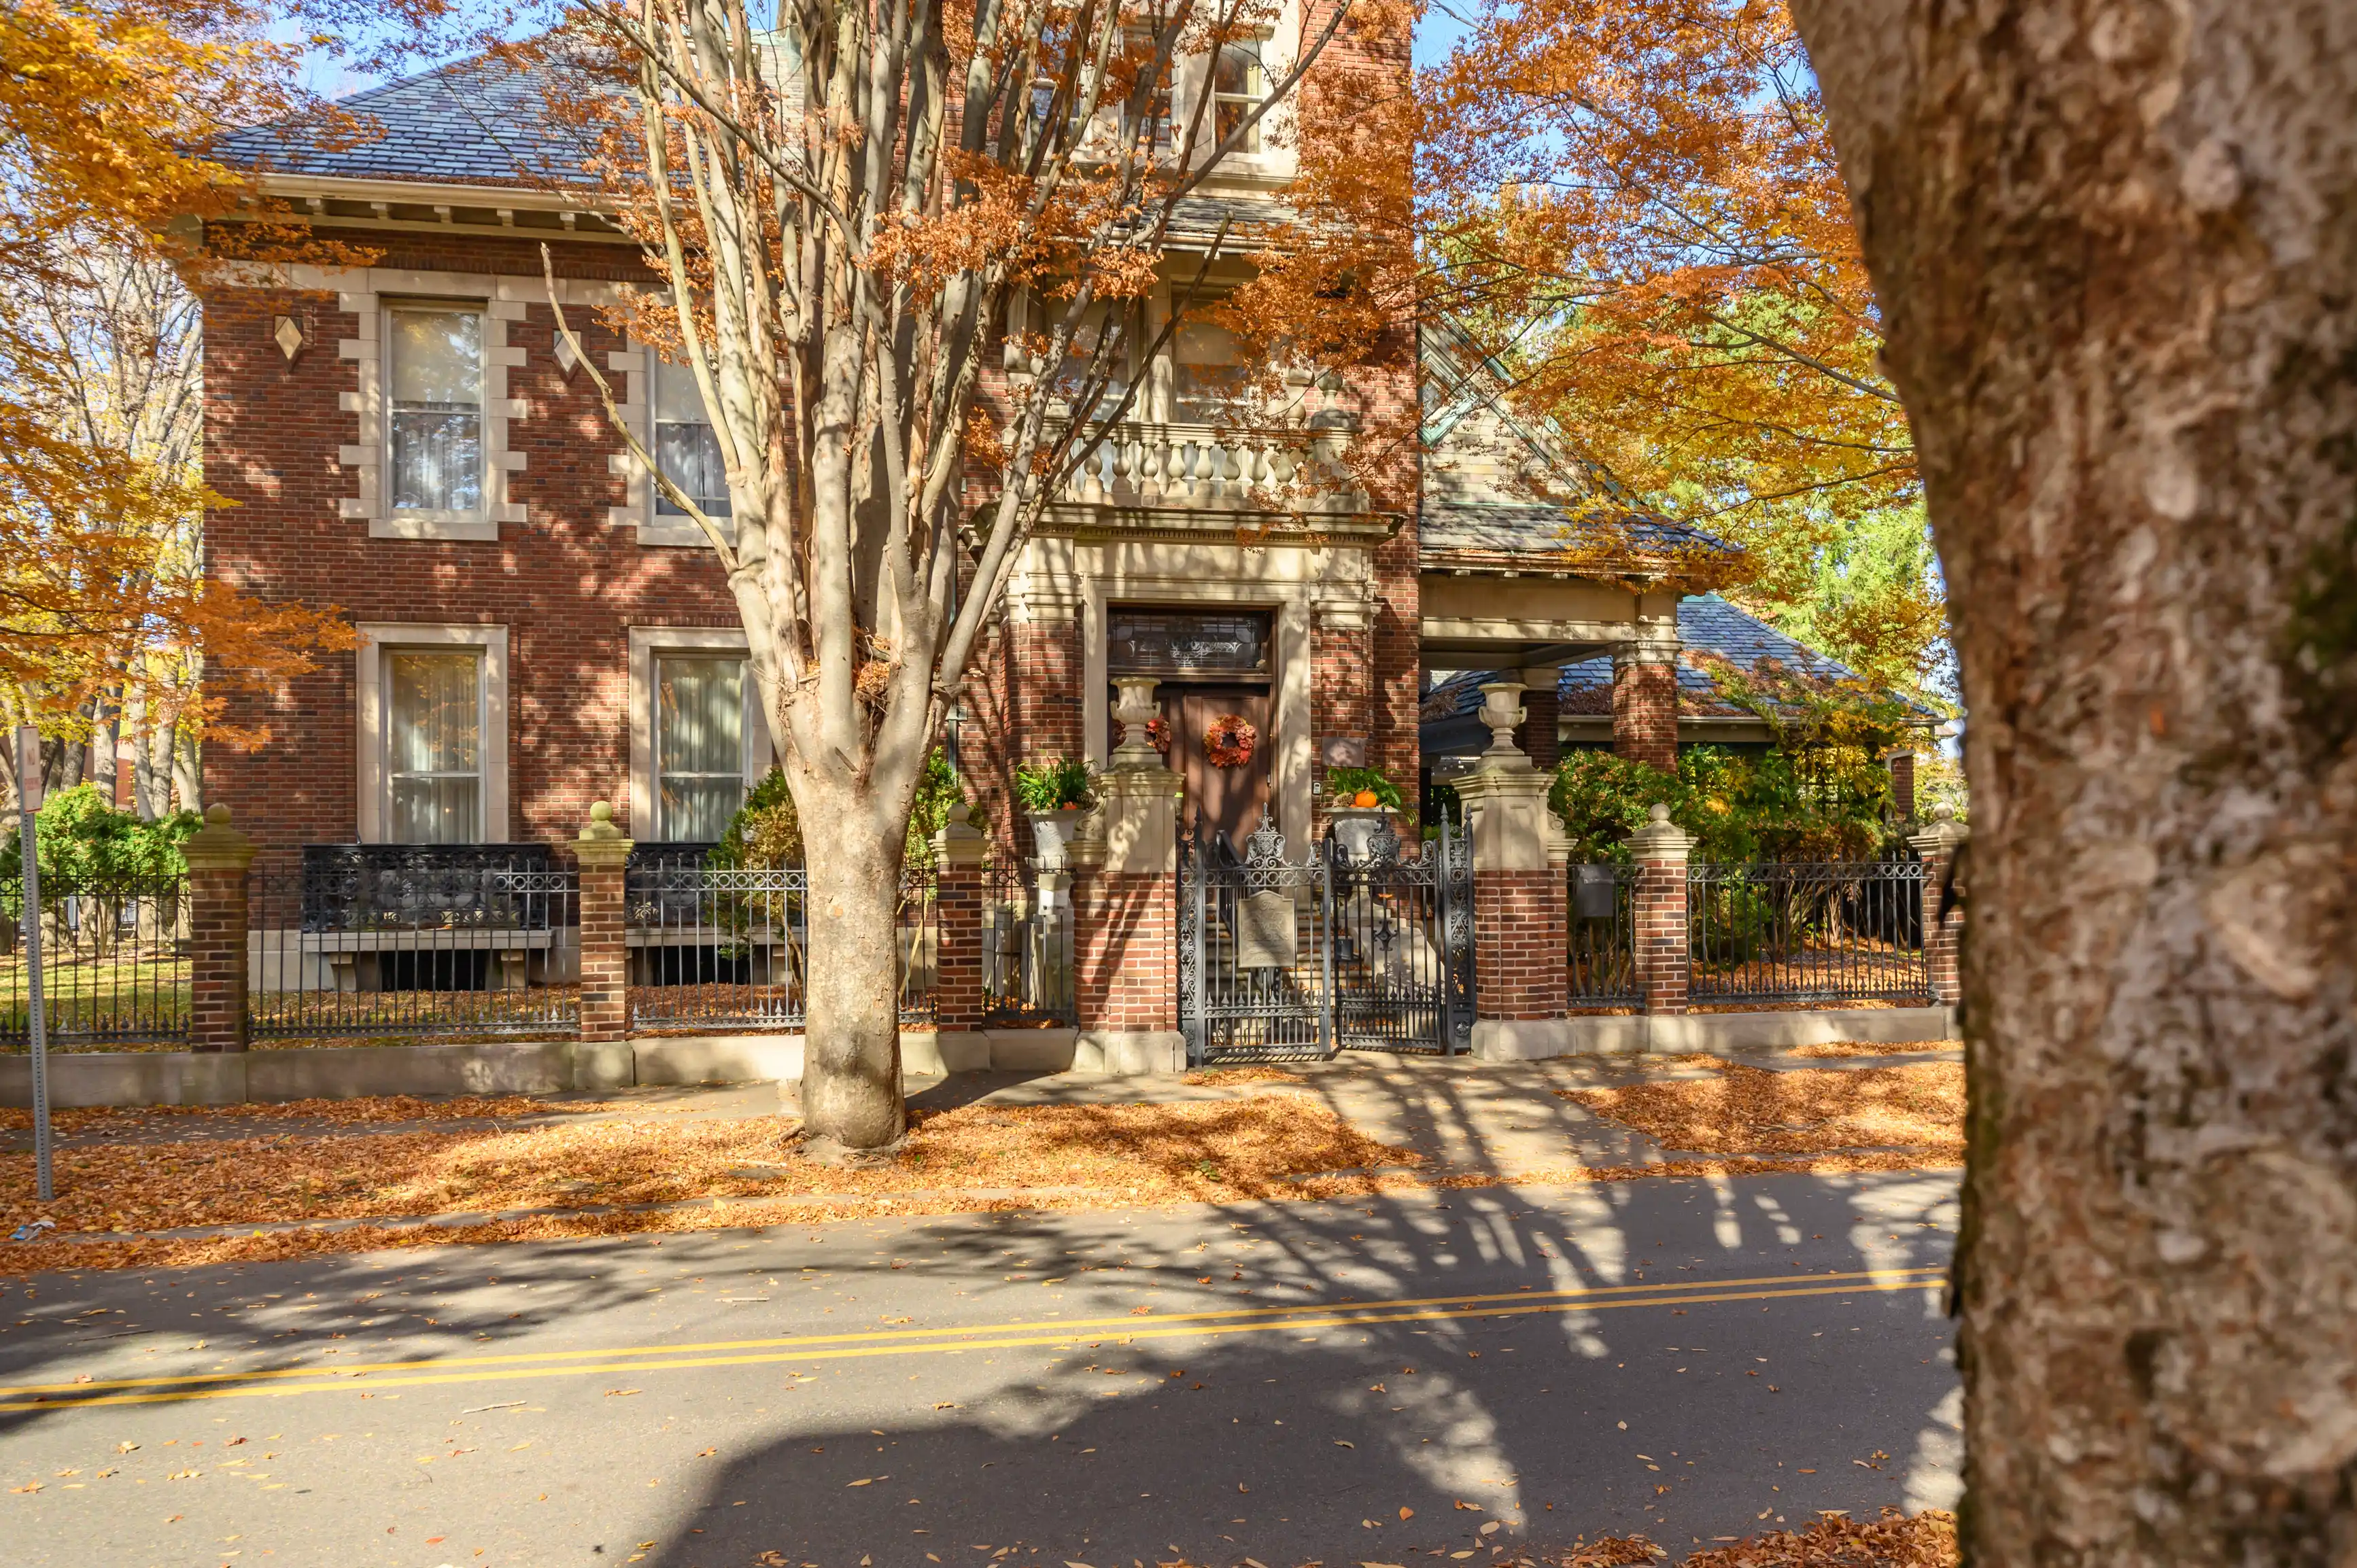 Brick house with autumn foliage, iron fence, and fallen leaves on a sunny day.